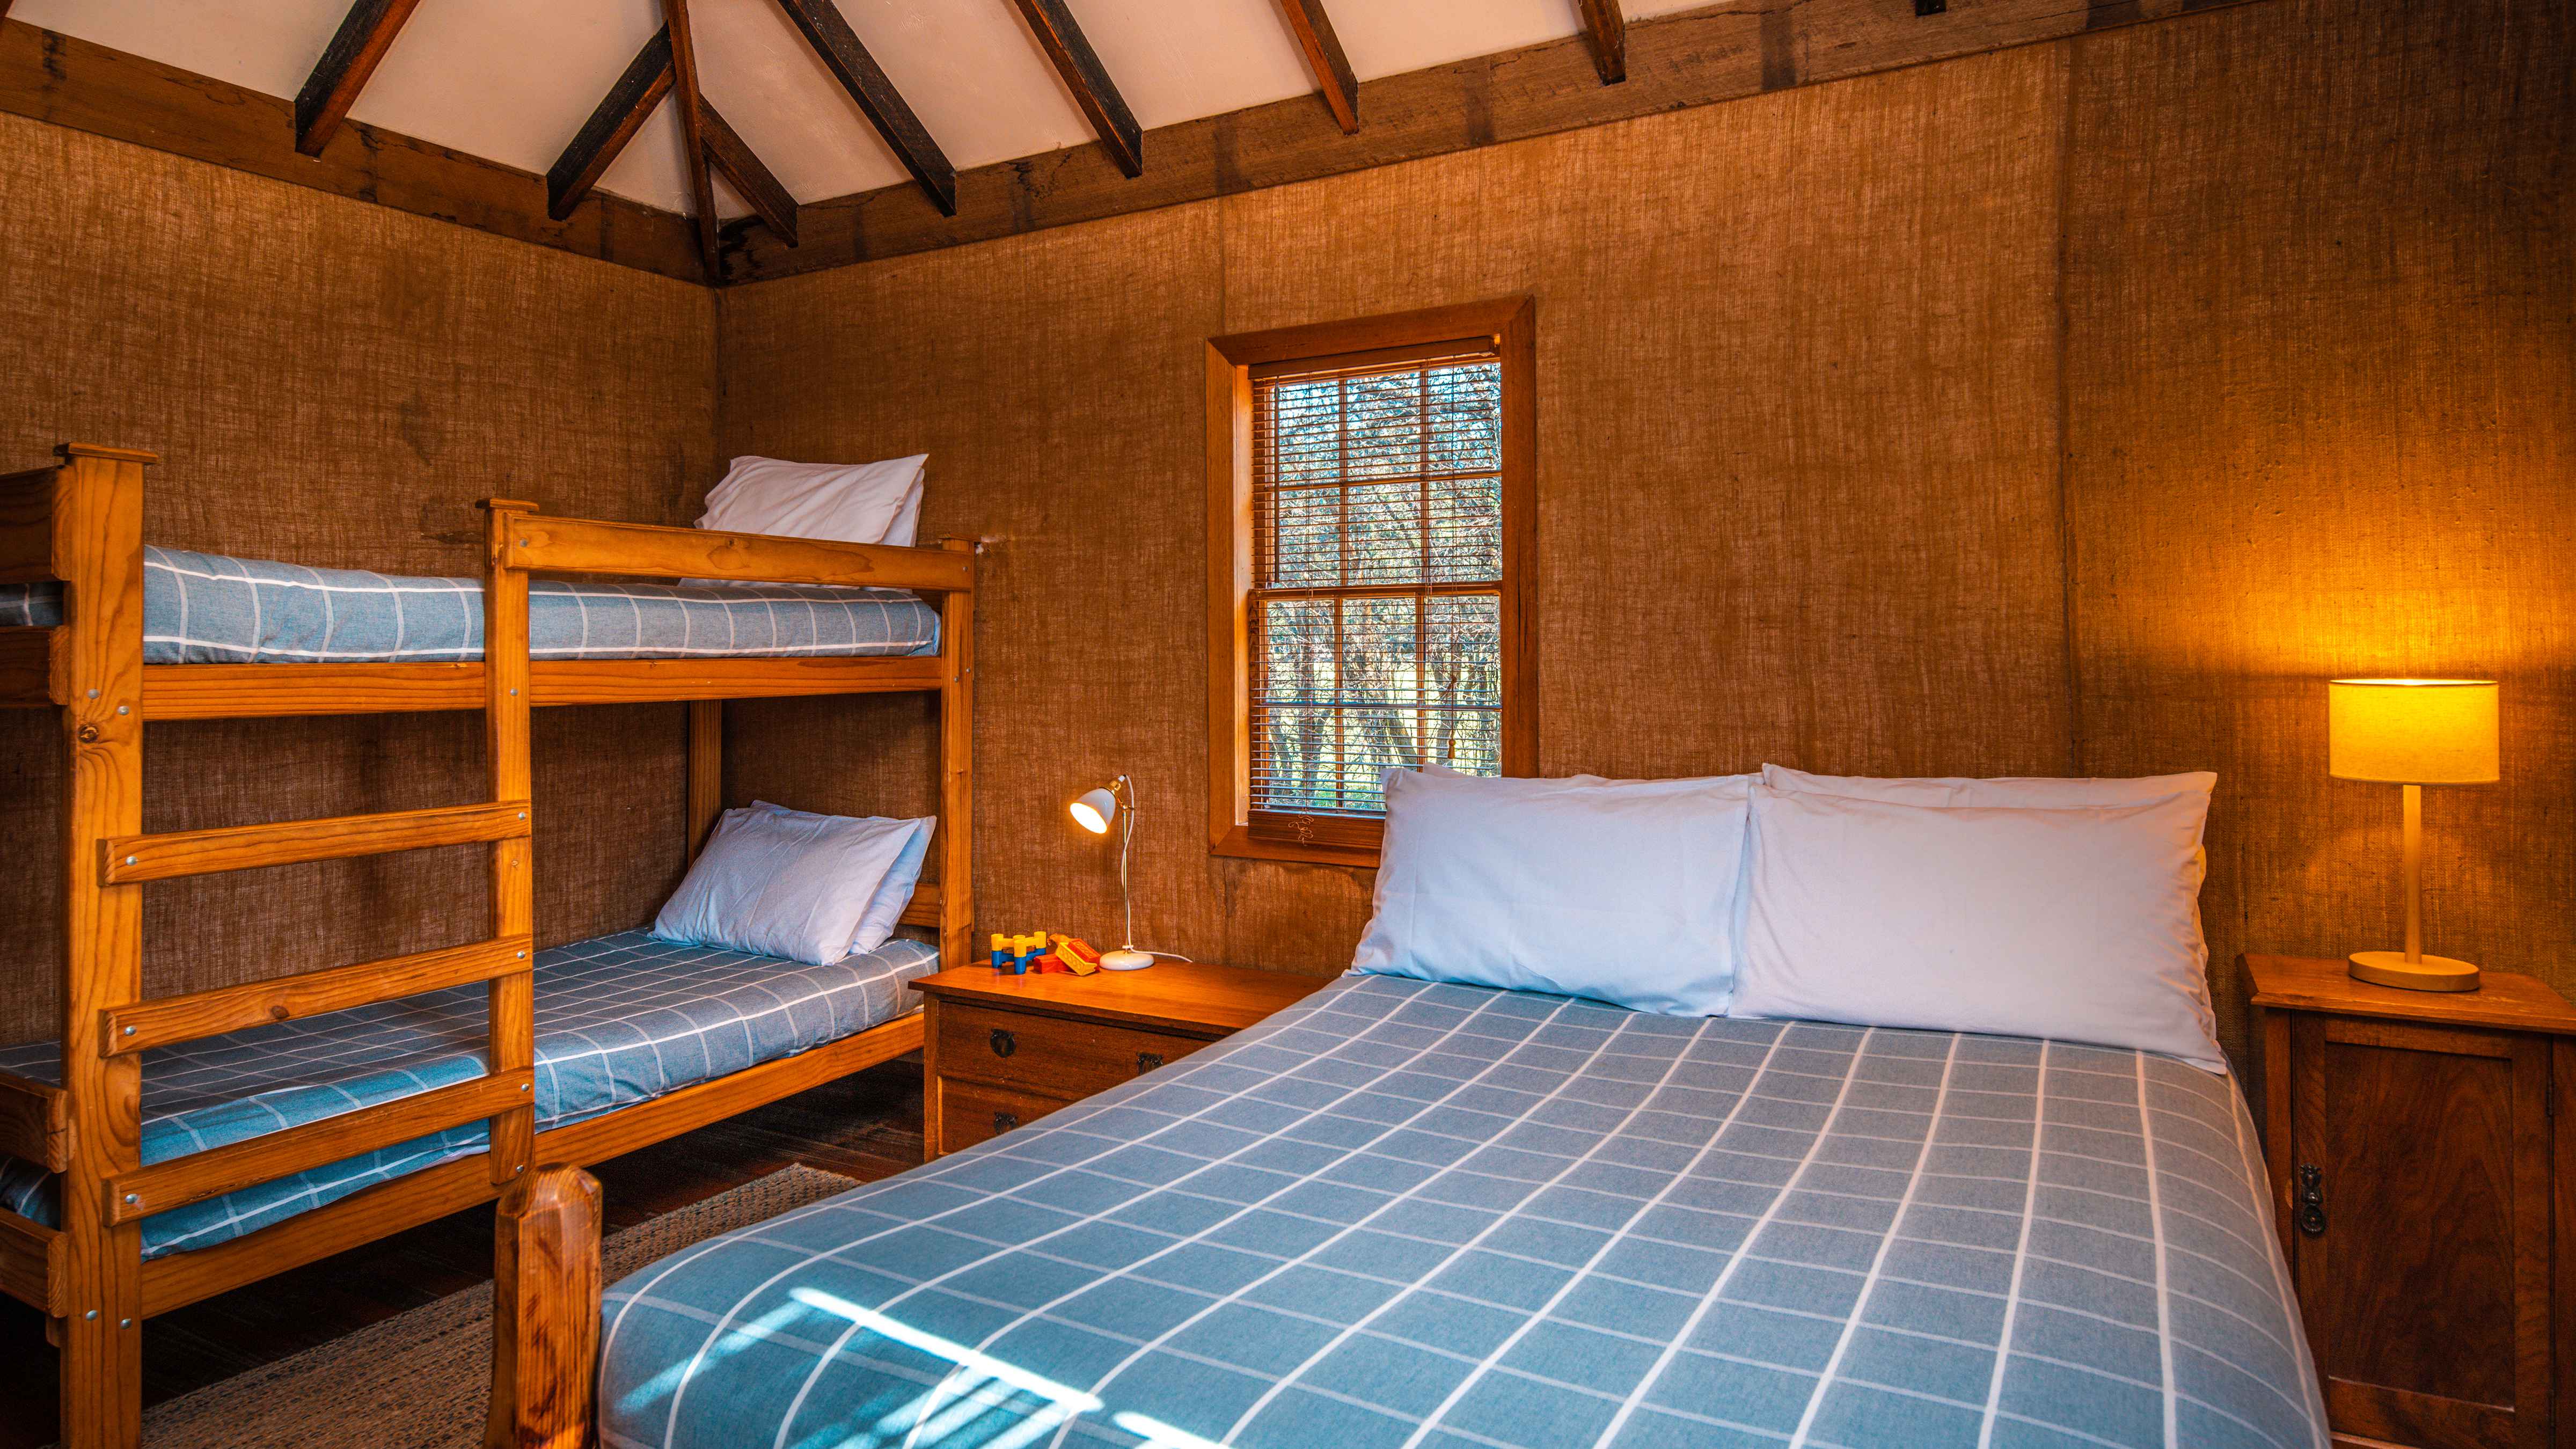 A double bed is in the foreground with a blue and white checked quilt cover and white pillows. To the left are a set of timber bunks with matching blue and white checked quilts and white pillows. The walls are covered in brown hessian and a window looks out to trees. A set of drawers with a lamp sits between the bed and the bunks and another bedside cupboard with a light sits to the right of the double bed. The ceiling is white with timber beams. Photo: Rob Burnett.